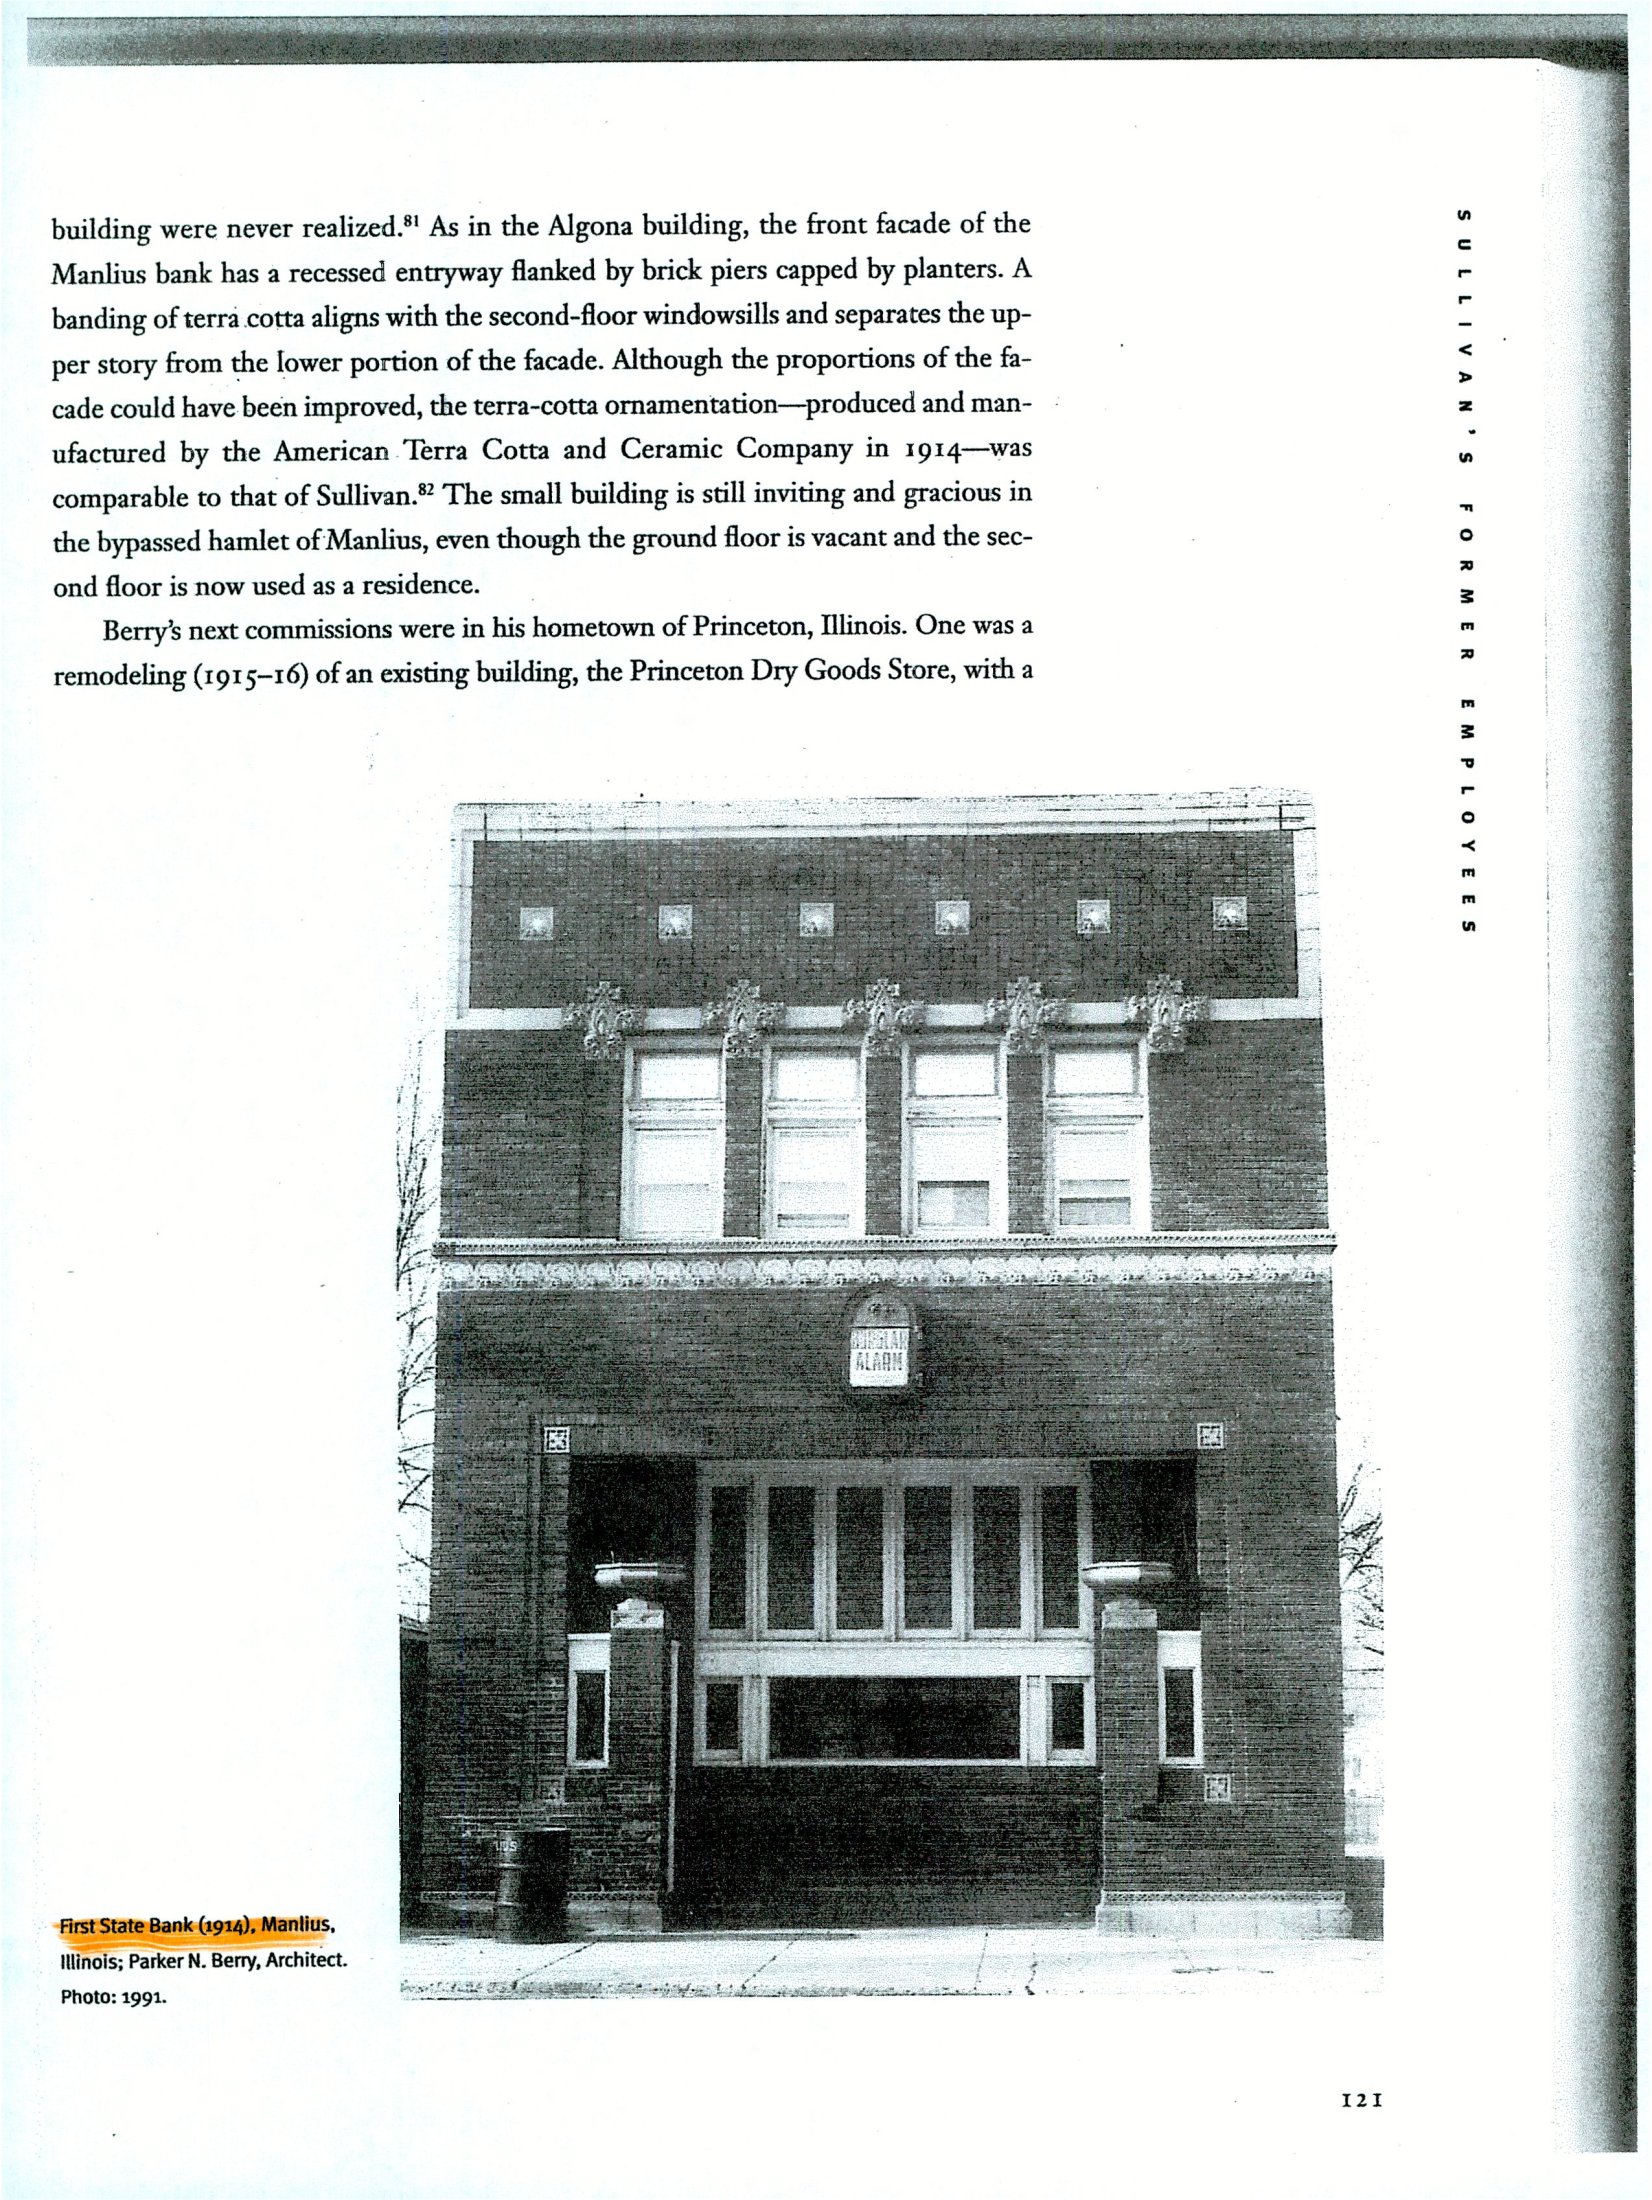 Album 11 FIRST STATE BANK Page 050